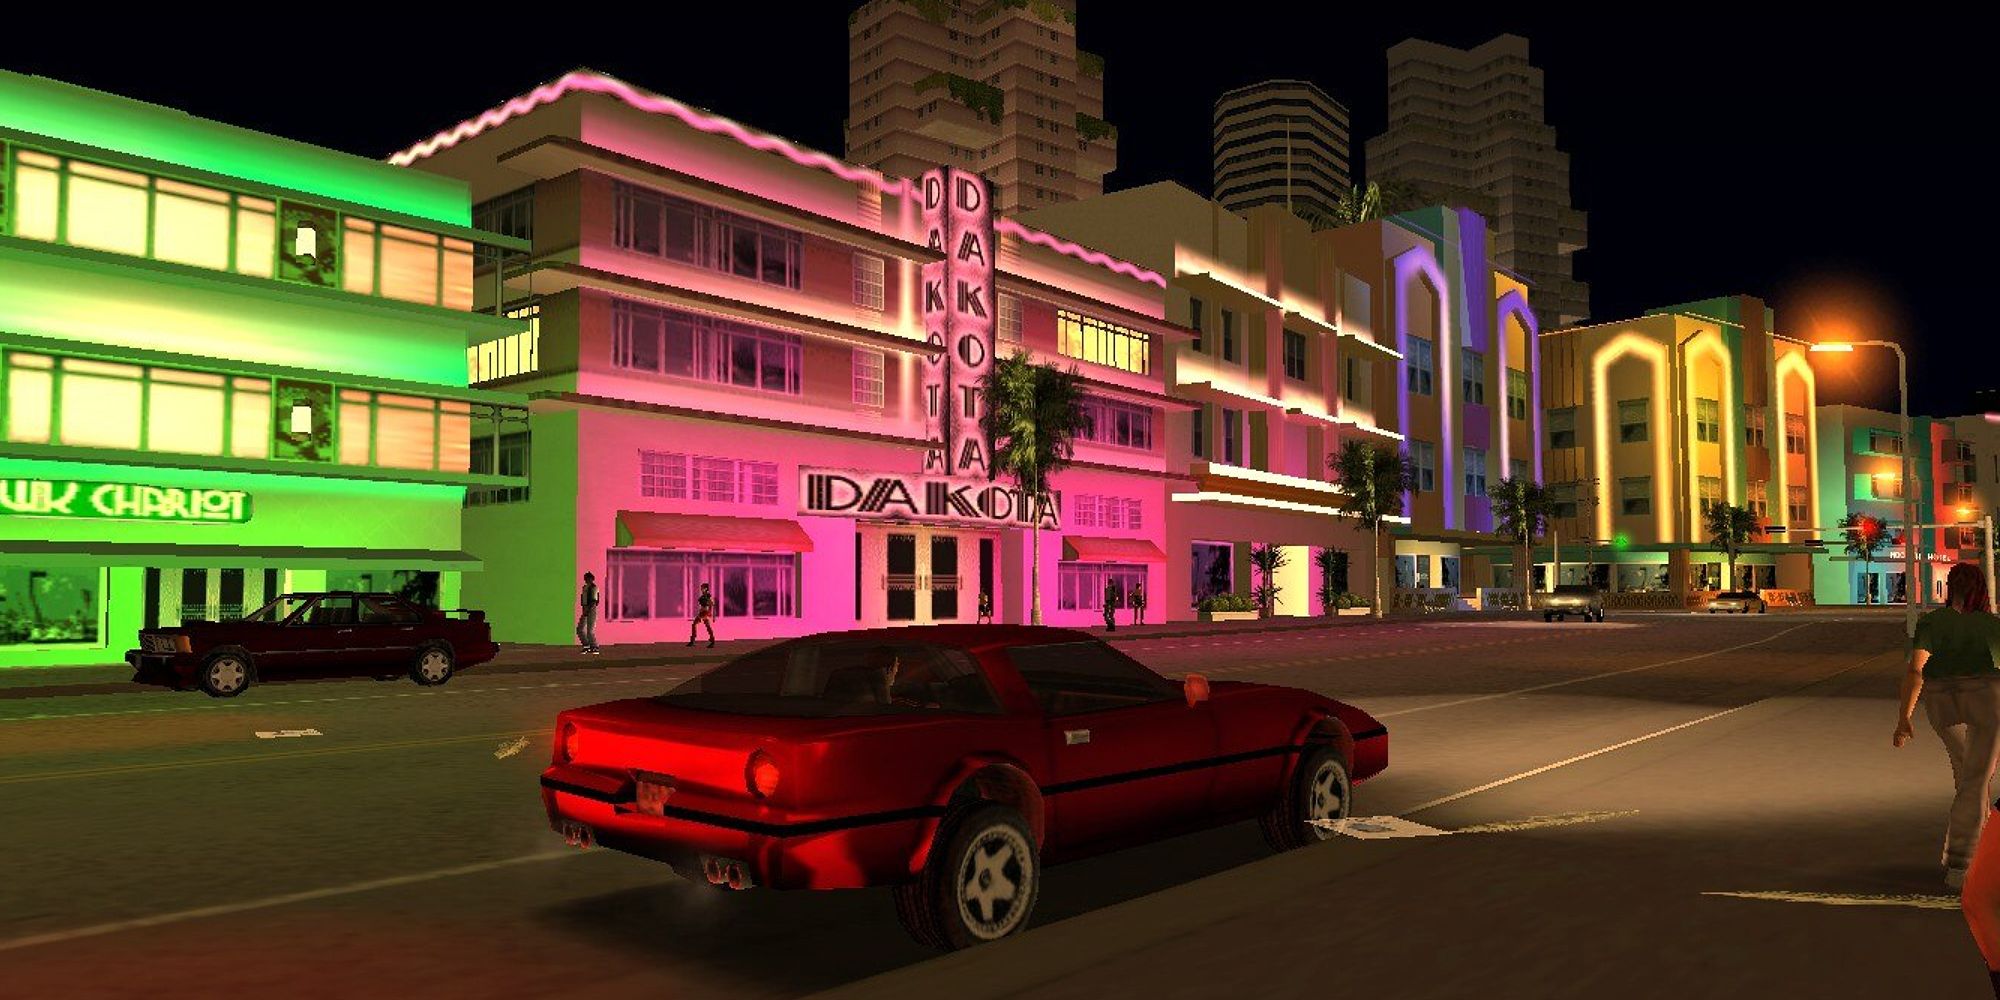 A red sports car seated at the street of neon buildings